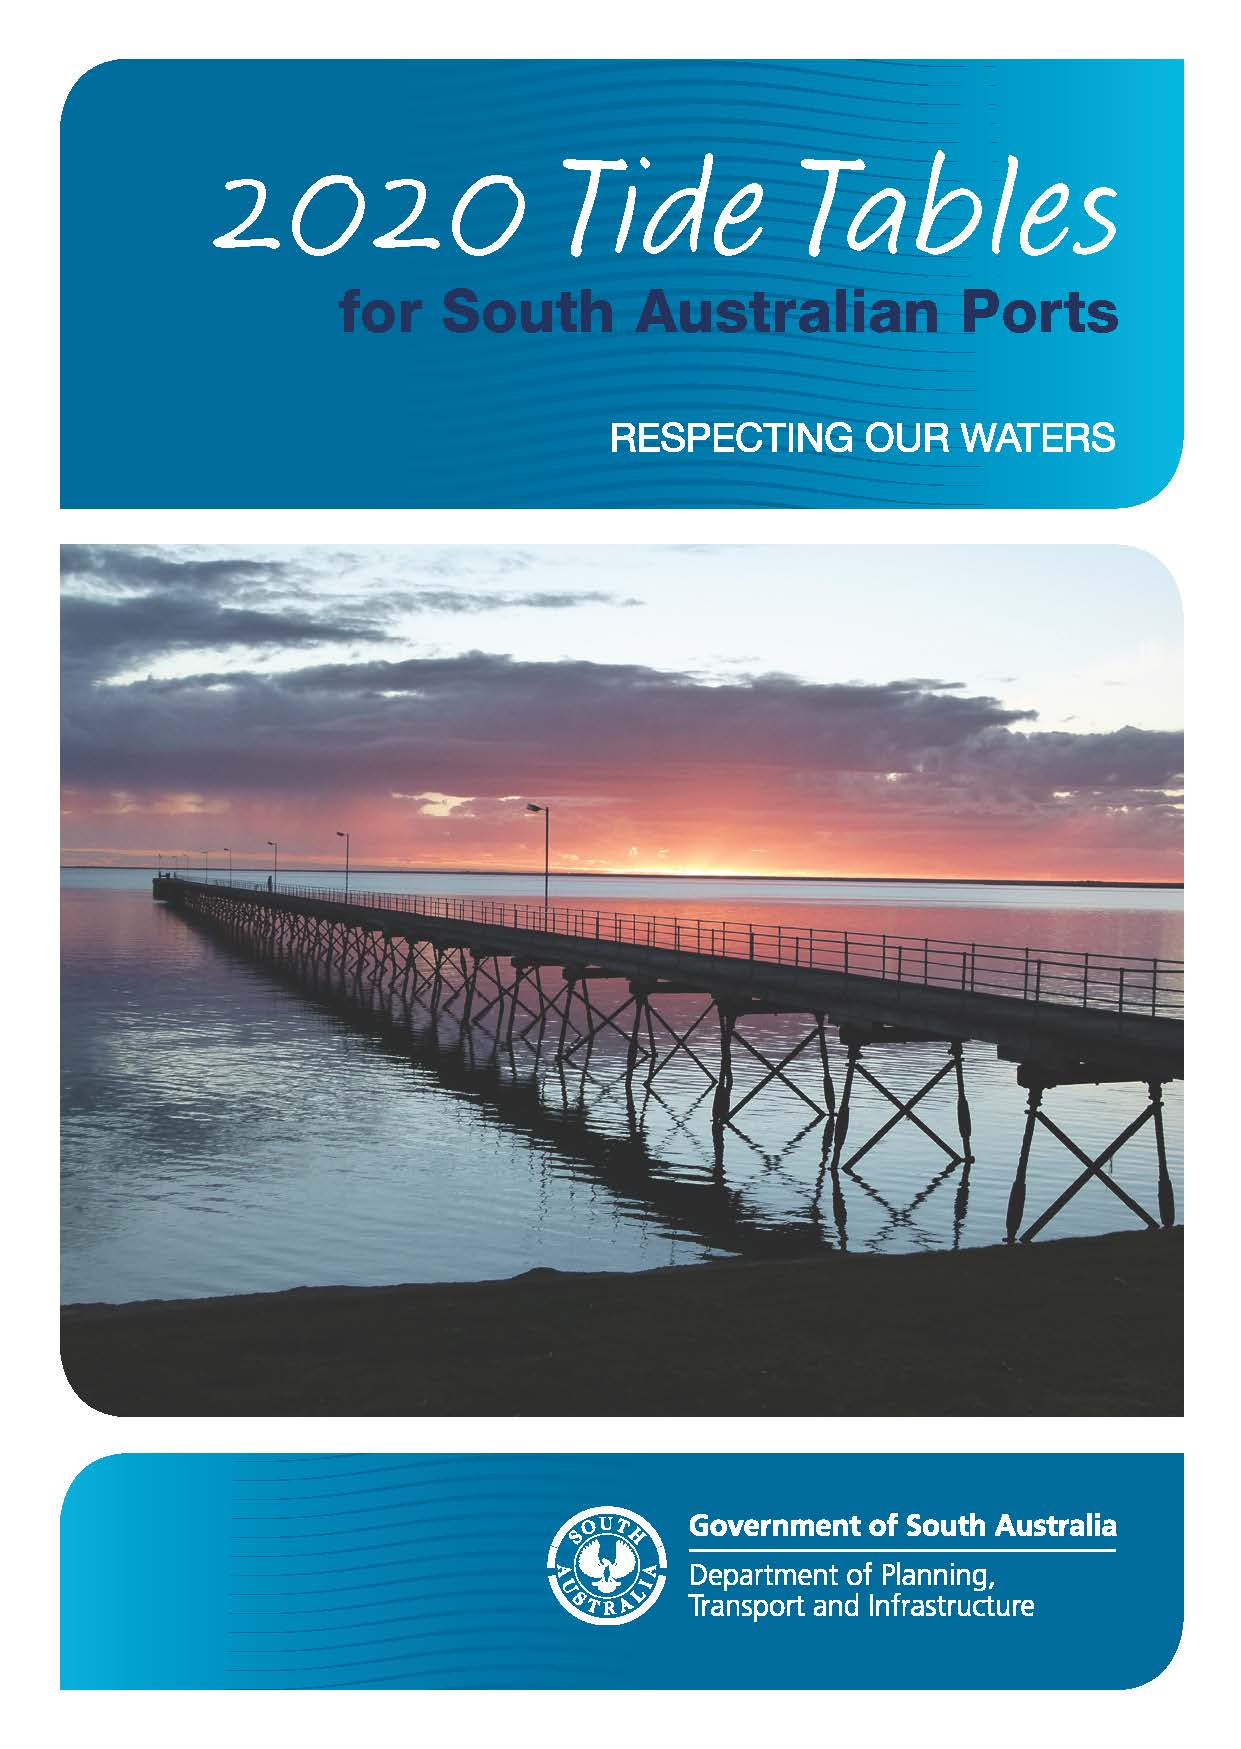 The cover of the Tide Tables book, showing a jetty reaching out into the water, with the title and an SA Government logo